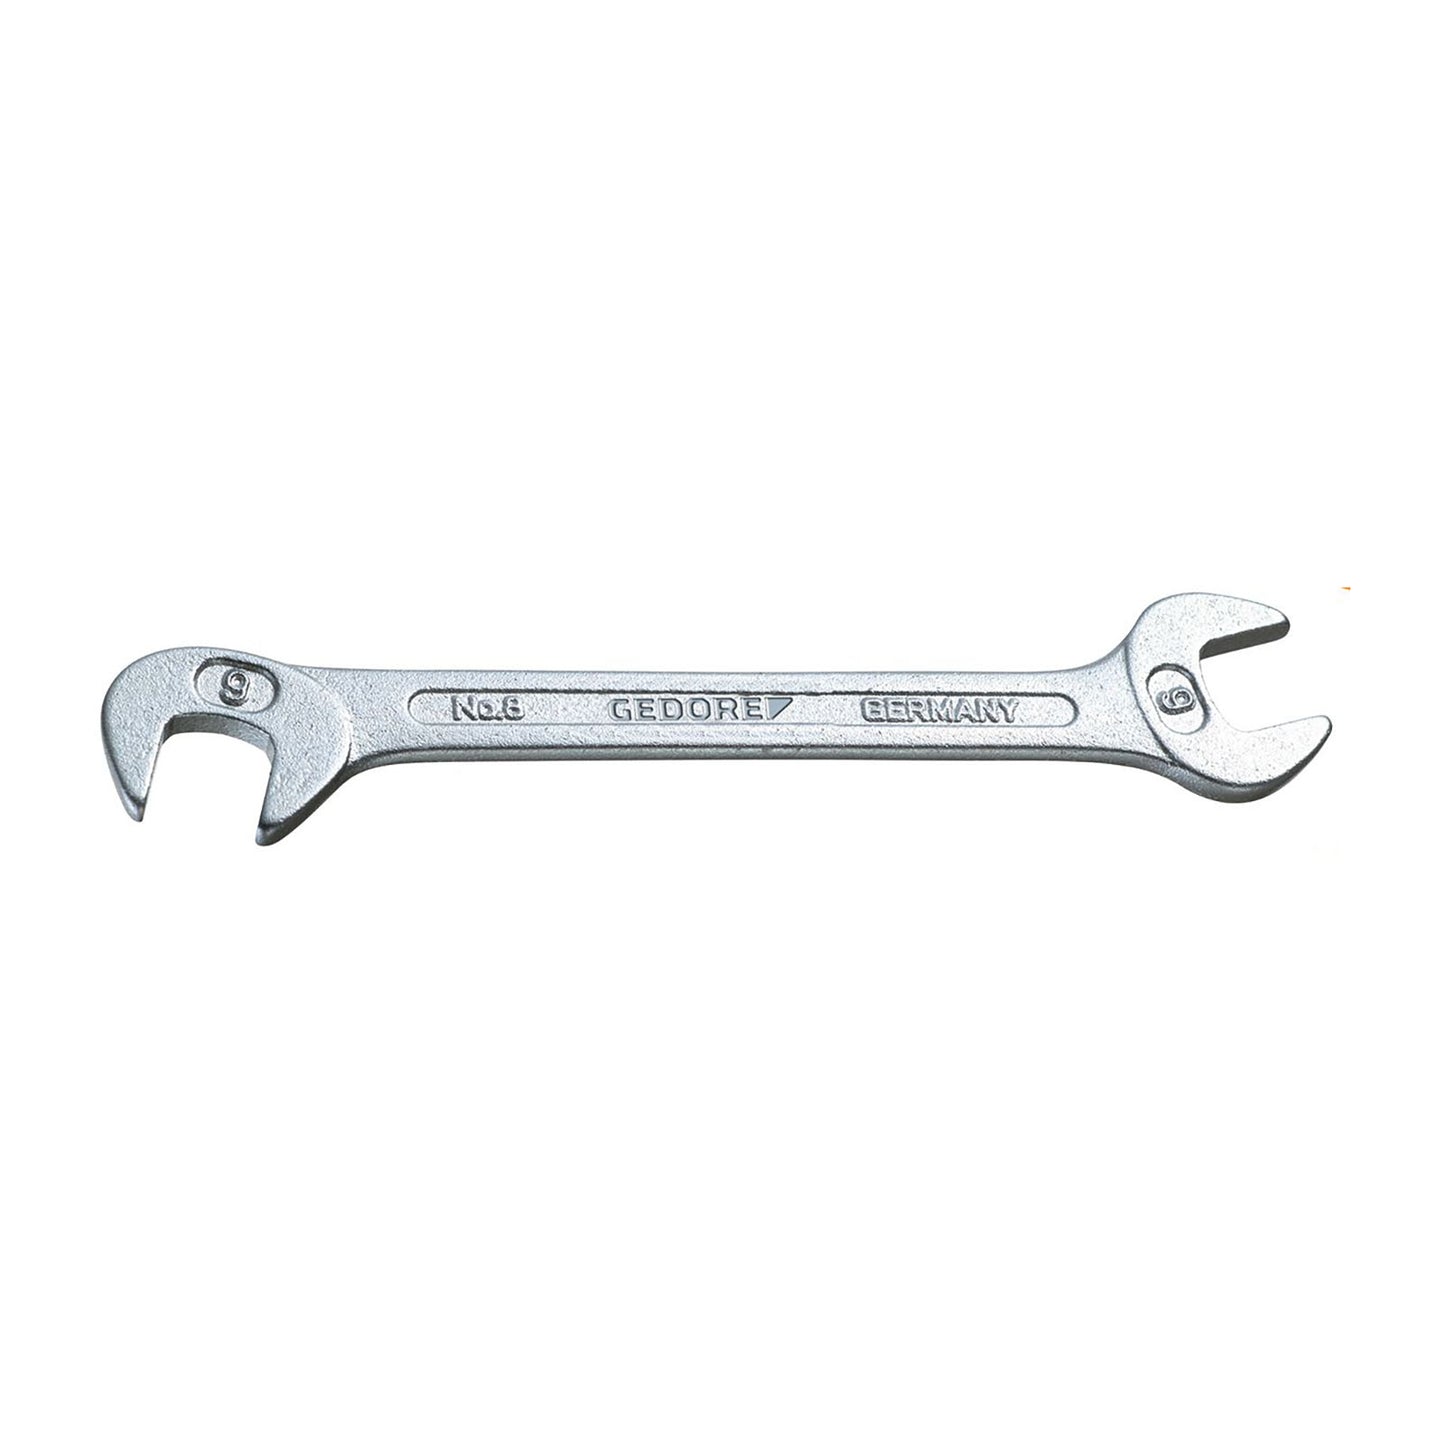 GEDORE 8 8 - Small Fixed Wrench, 8mm (6094550)